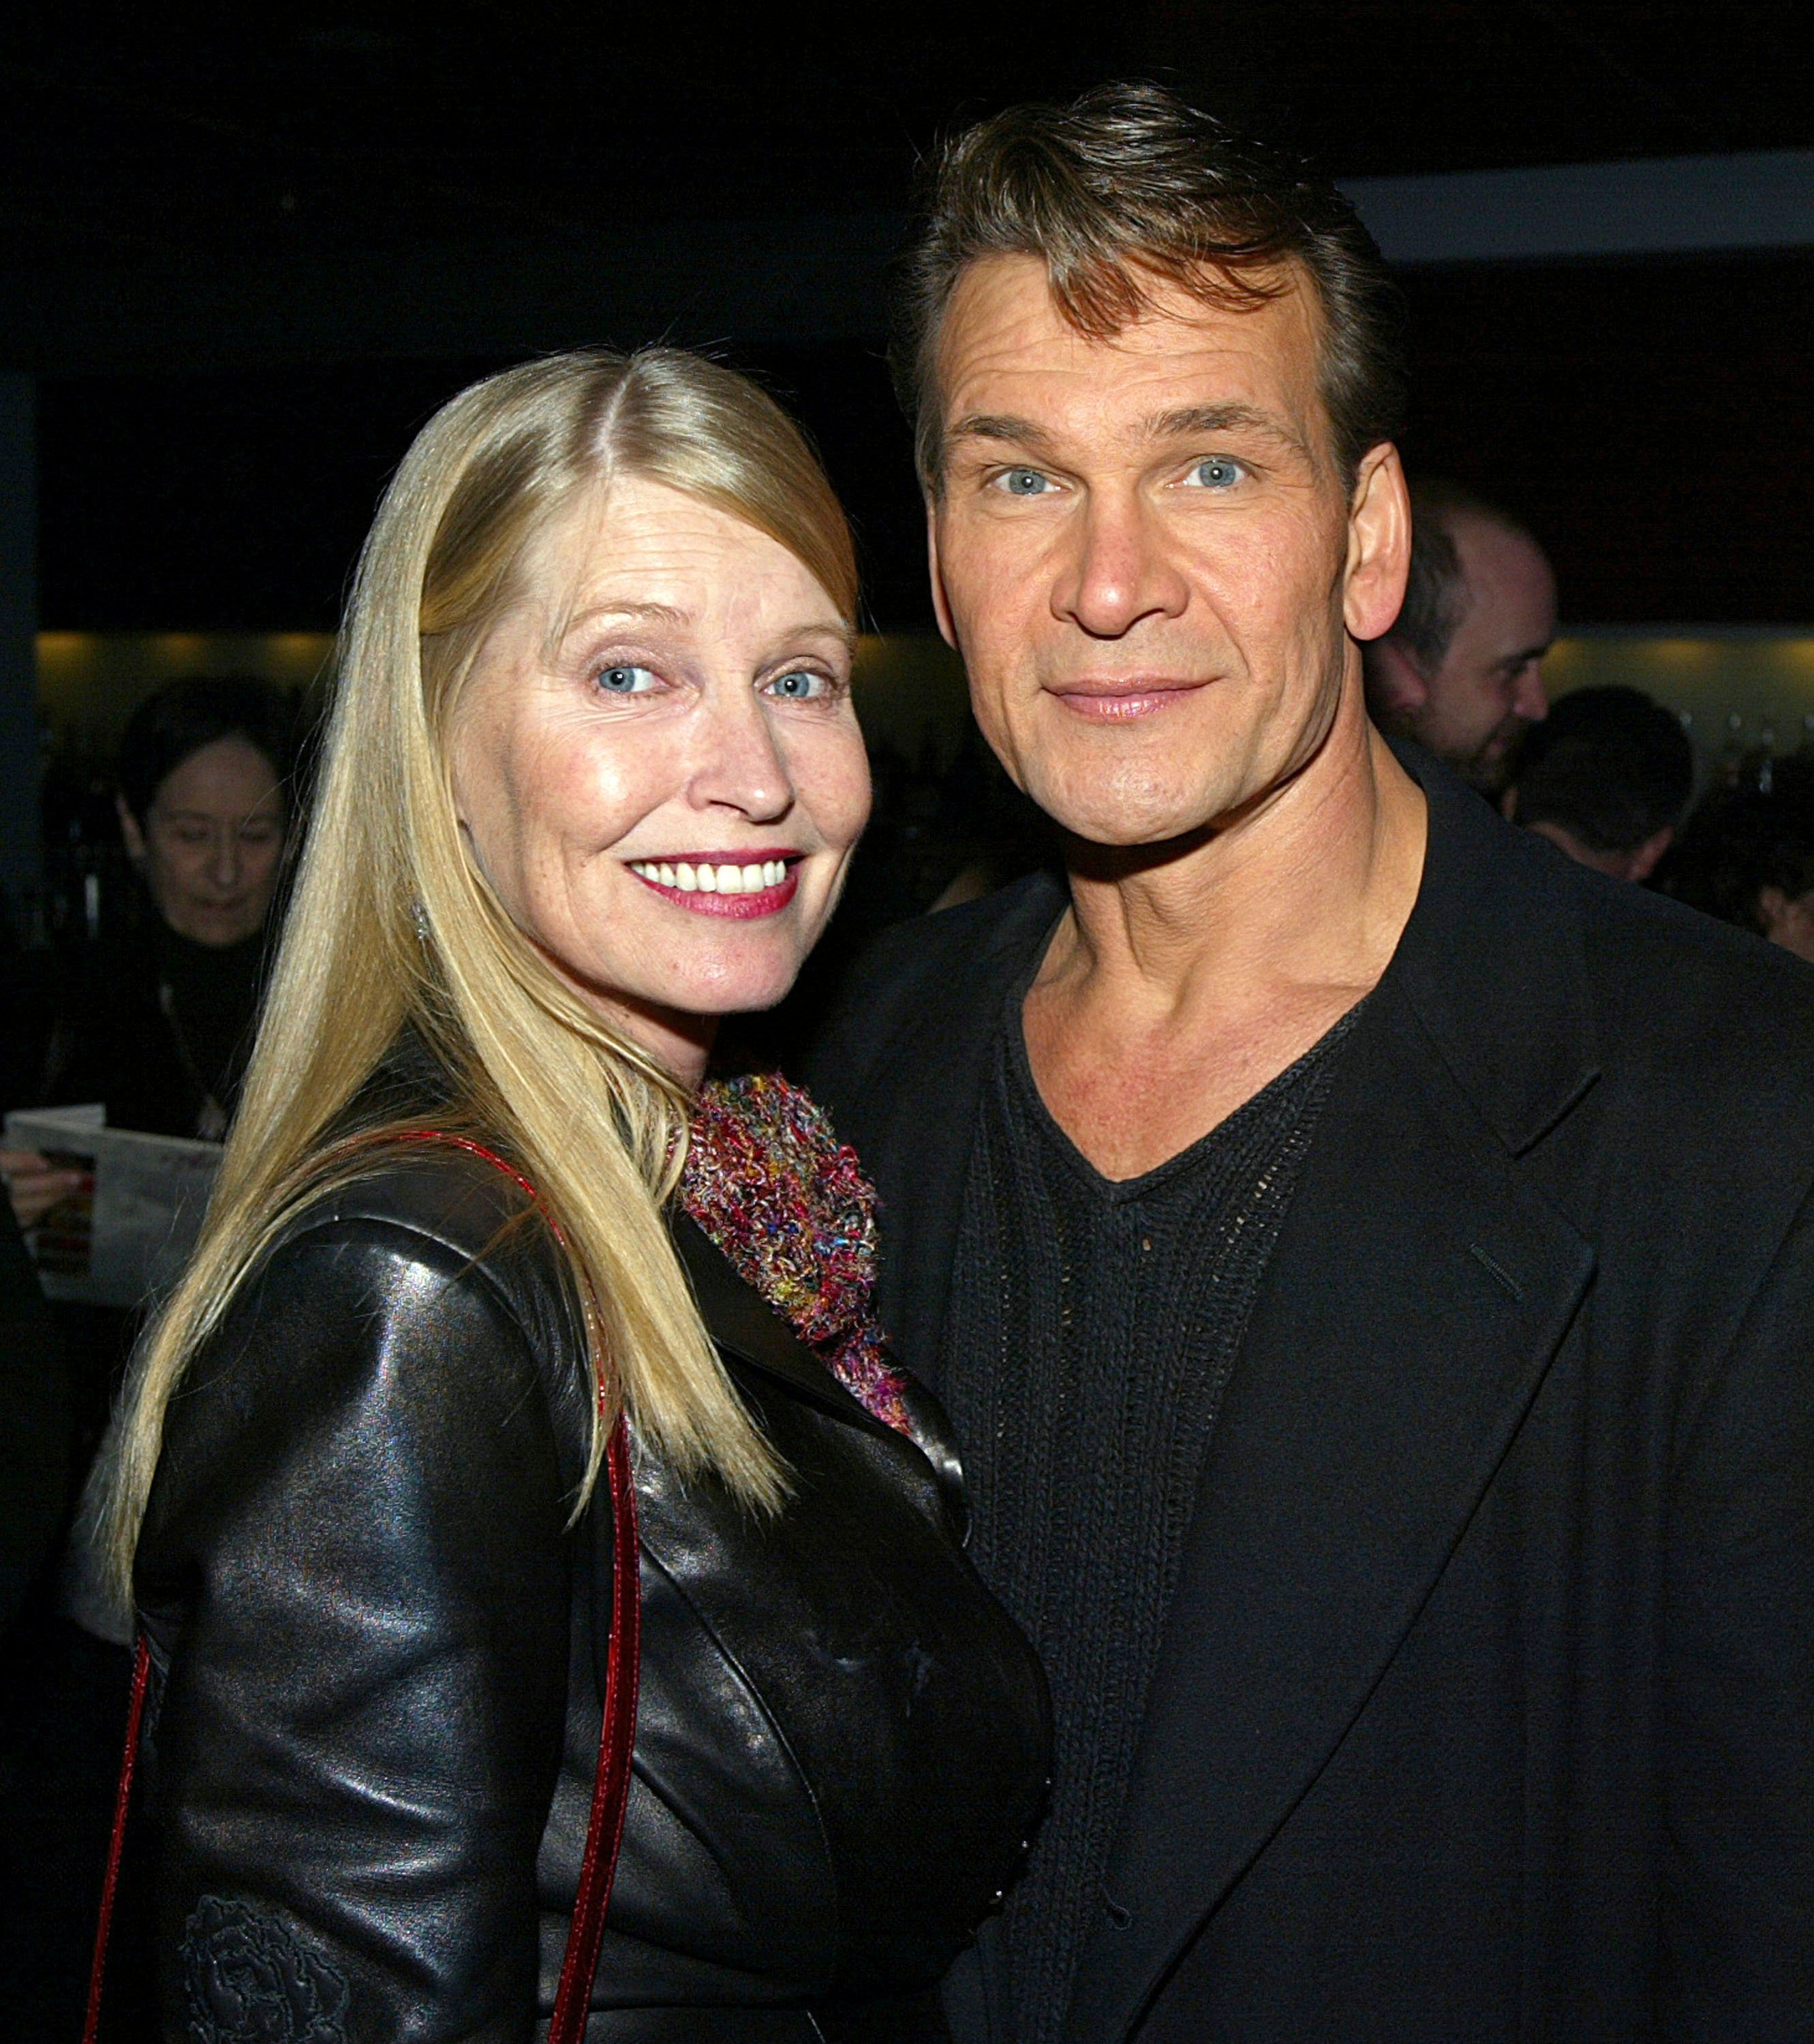 Patrick Swayze and Lisa Niemi in California 2004. | Source: Getty Images